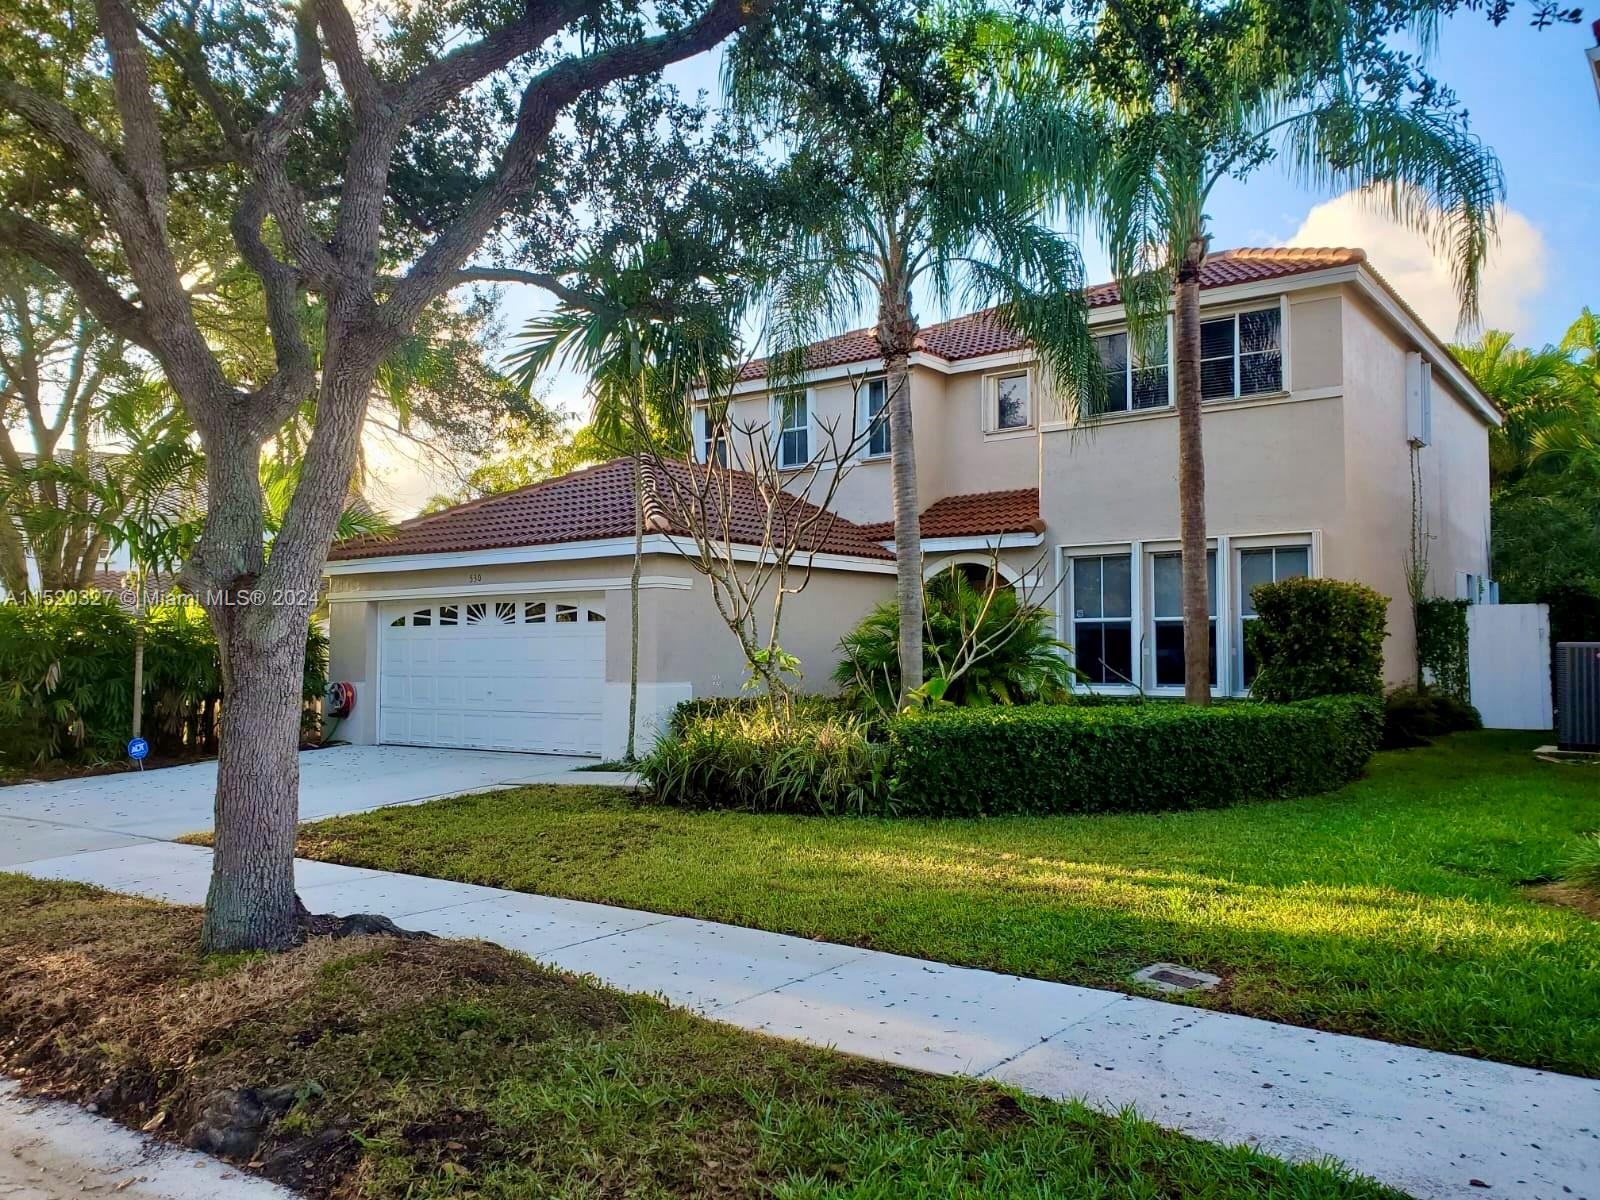 530 Slippery Rock Rd, Weston, Florida 33327, 4 Bedrooms Bedrooms, ,2 BathroomsBathrooms,Residential,For Sale,530 Slippery Rock Rd,A11520327